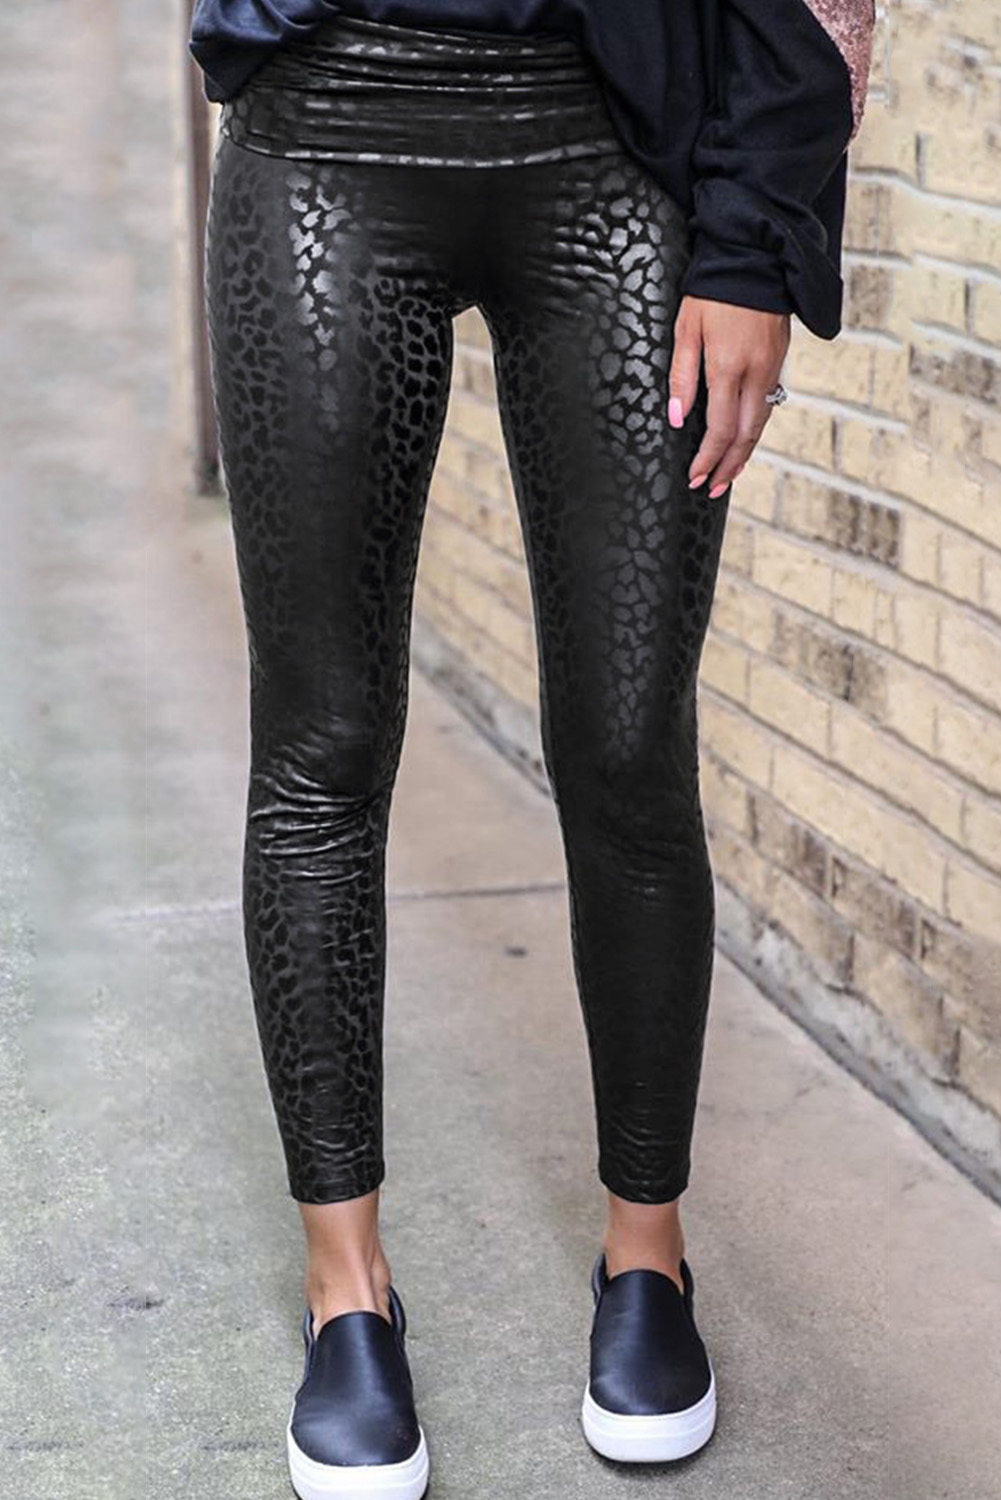 Shewin Wholesale Southern Black Shiny Leopard Casual Textured LEGGINGS